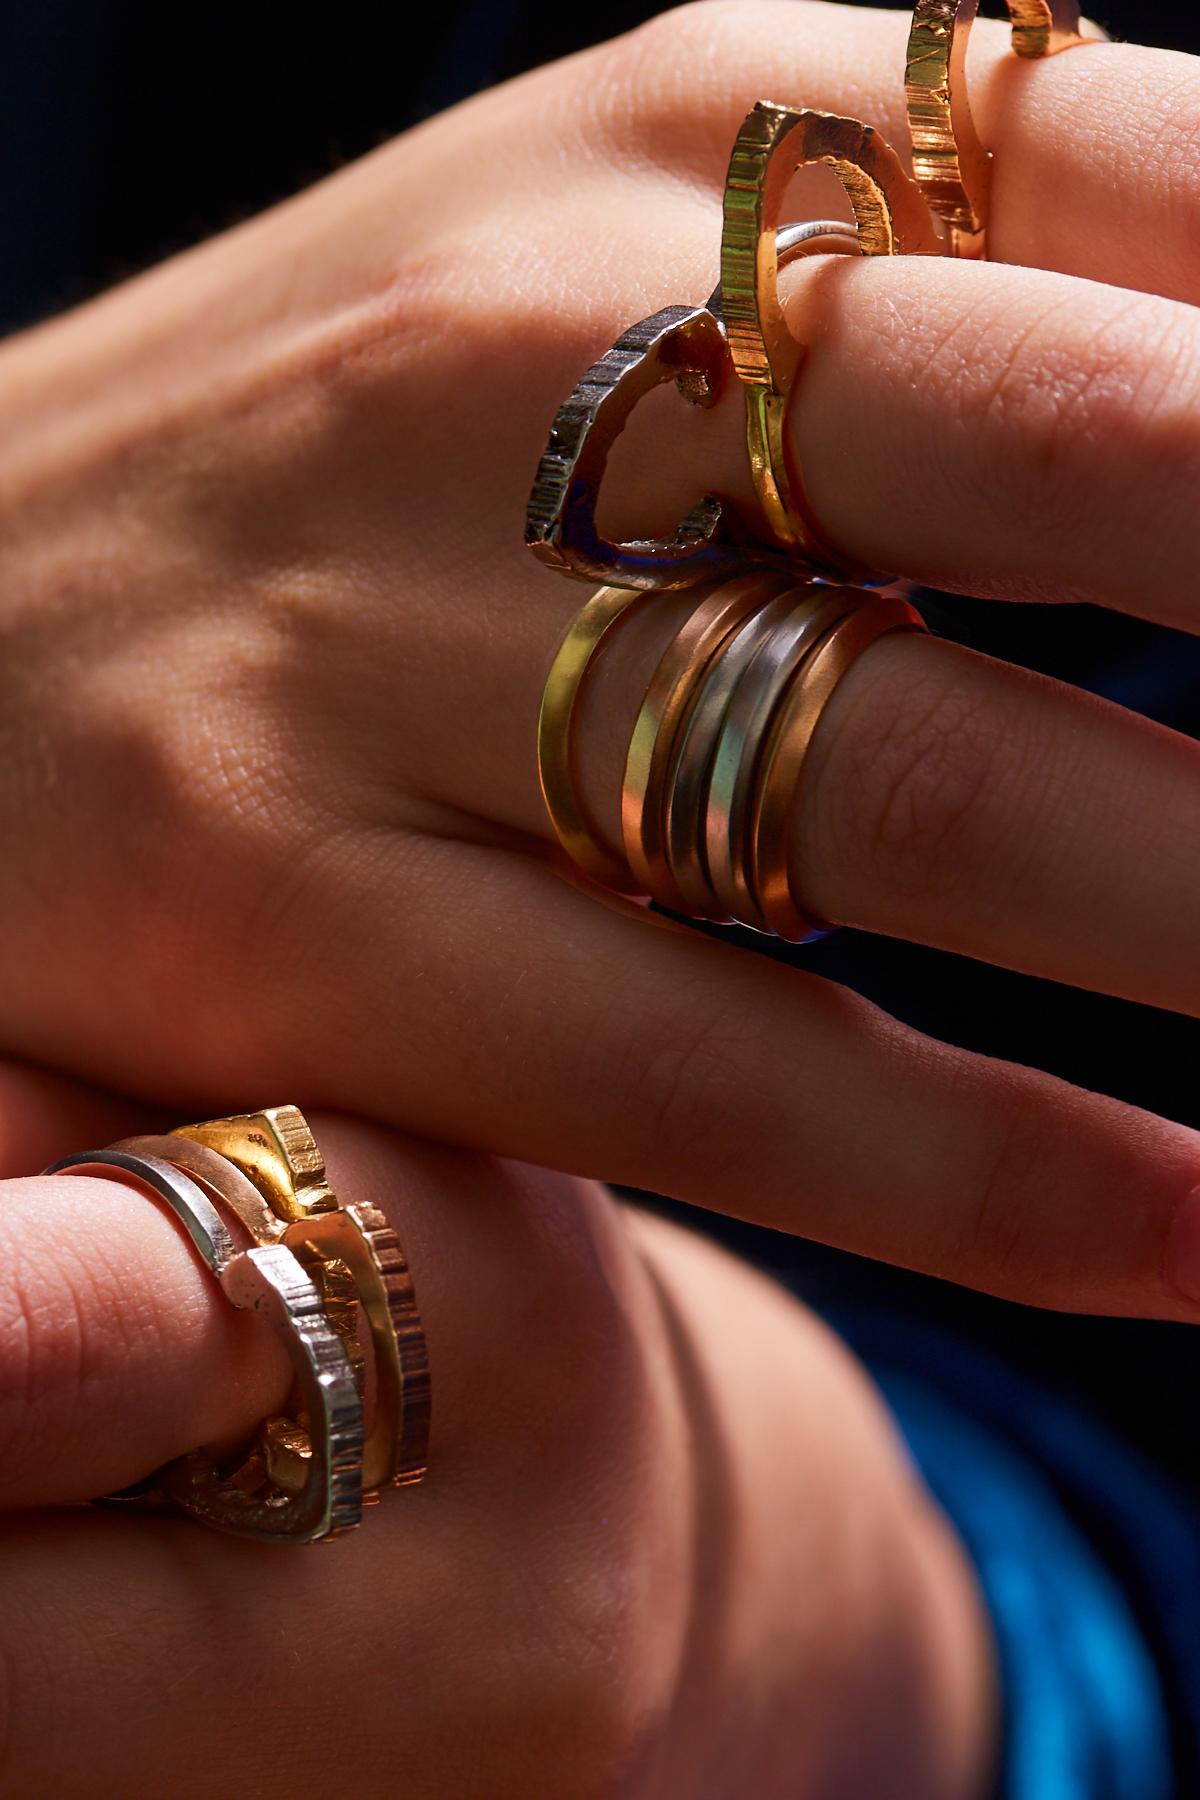 The Rock Hound have based a set of stacking rings around their instantly recognisable logo and handmade them in three tones of sumptuous 18 Carat Fairtrade Gold. This style is inverted with a knife-edge running around the outer rim.

Would make the